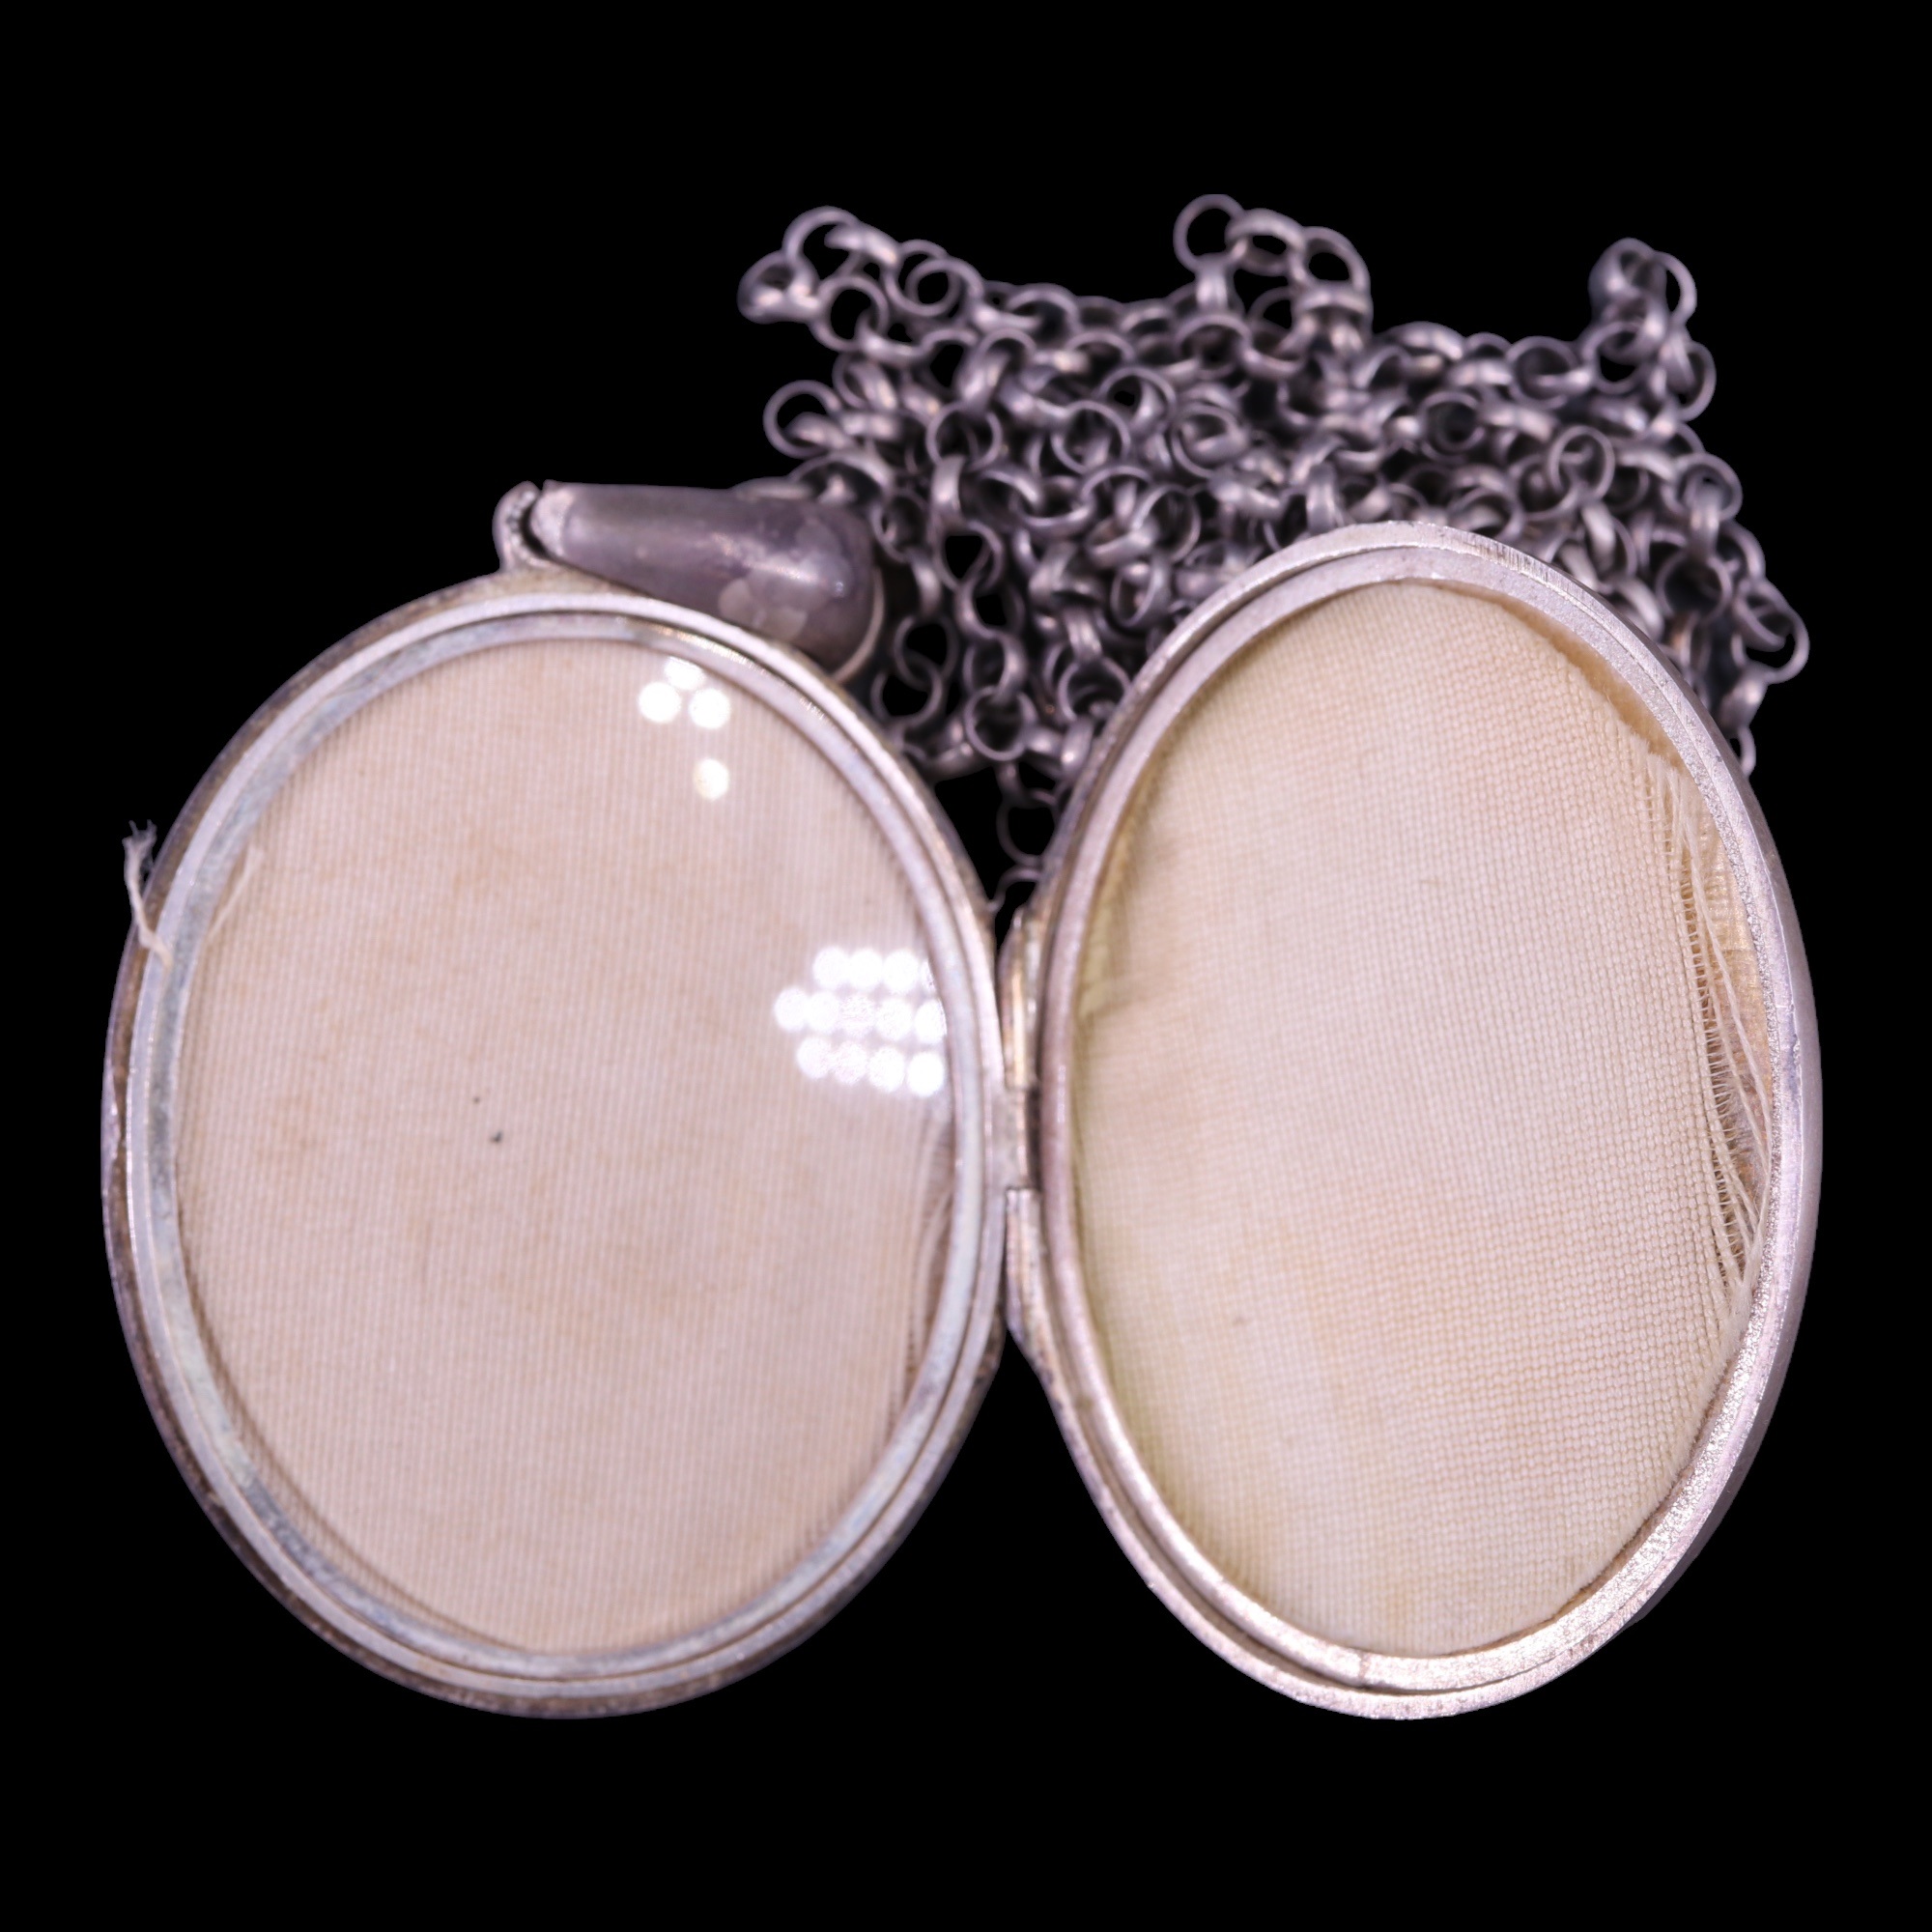 A Victorian large silver oval pendant double locket and belcher-link neck chain, locket 46 mm - Image 3 of 3